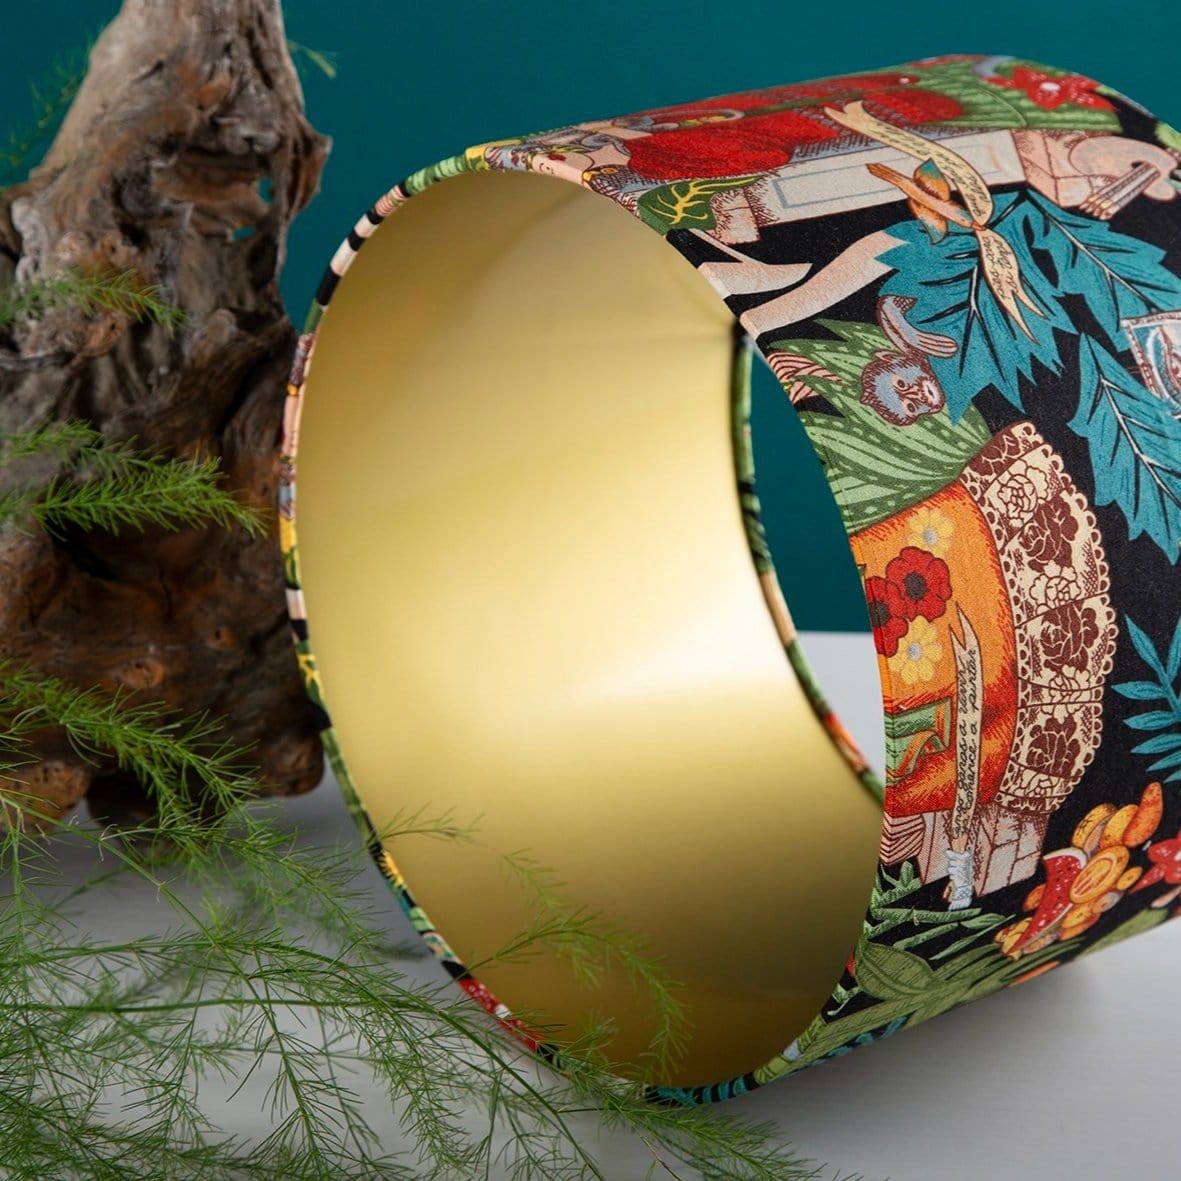 Glow&Co Lil' Bit Lux: Frida in the Garden (Black) Lampshade